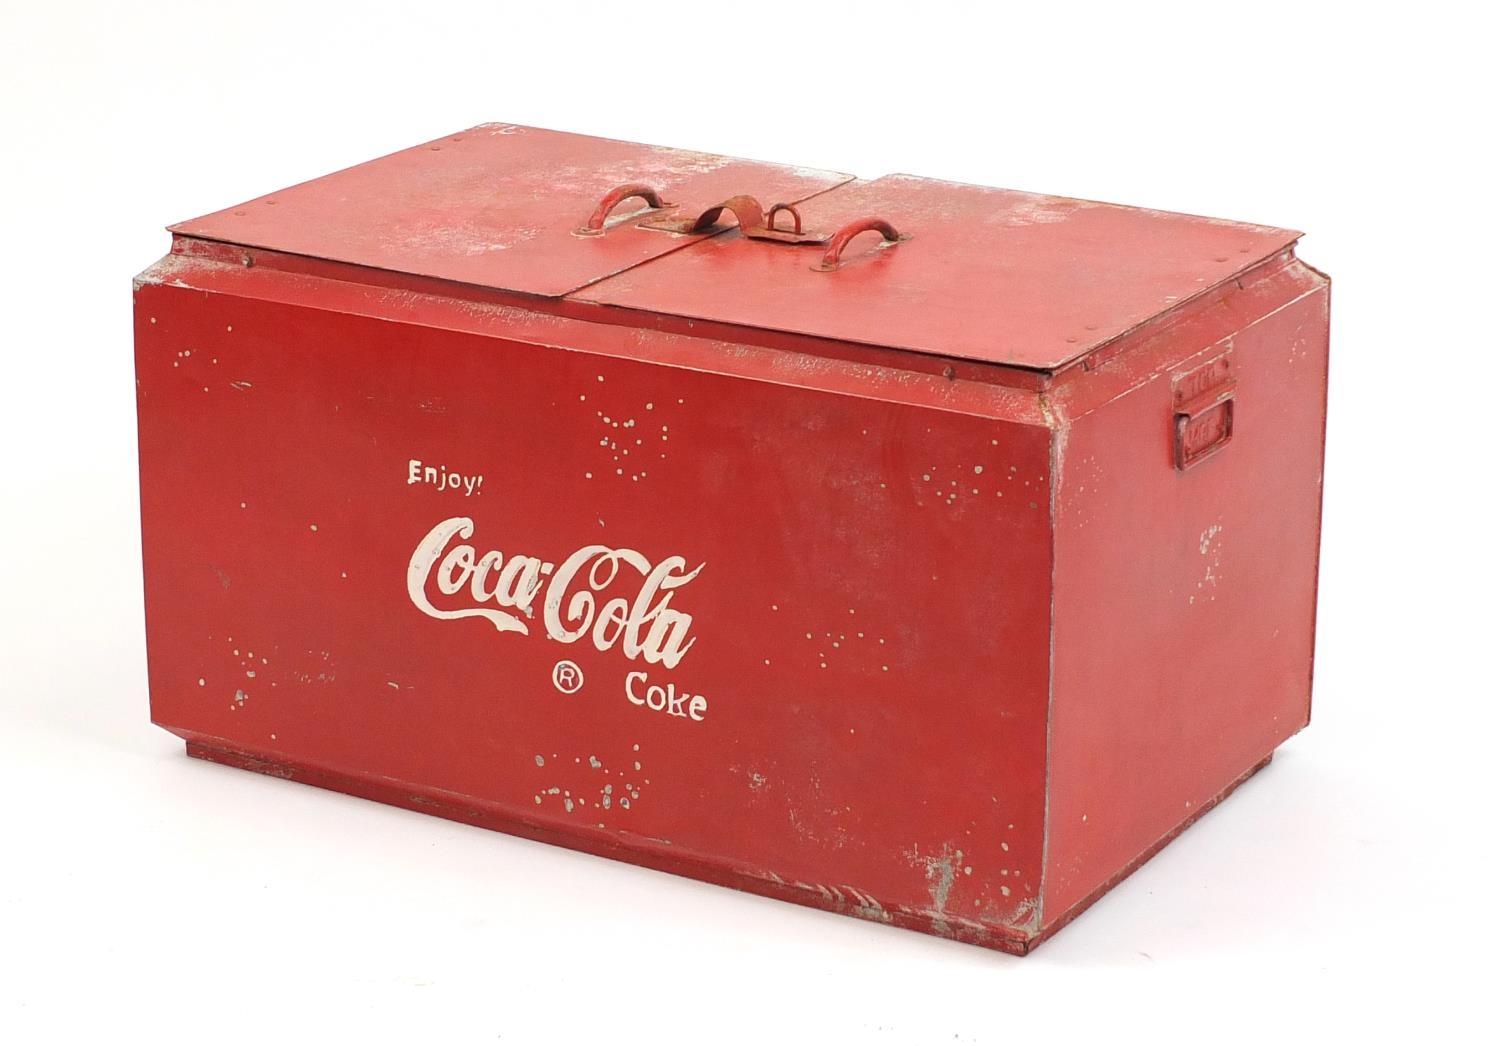 Retro Coca Cola cooler, 40cm H x 70cm W x 44cm D : For Further Condition Reports Visit Our